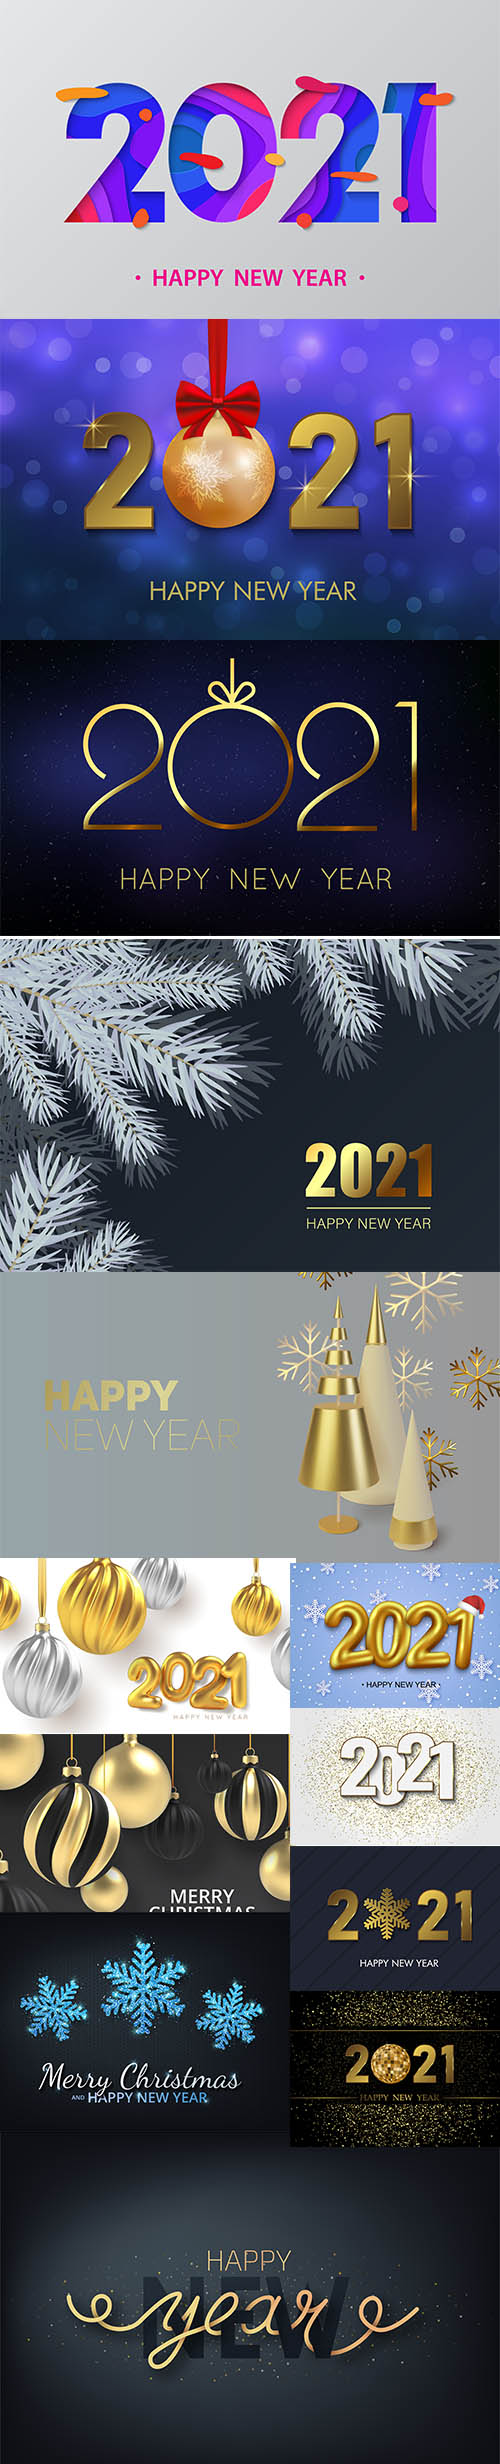 2021 new year background